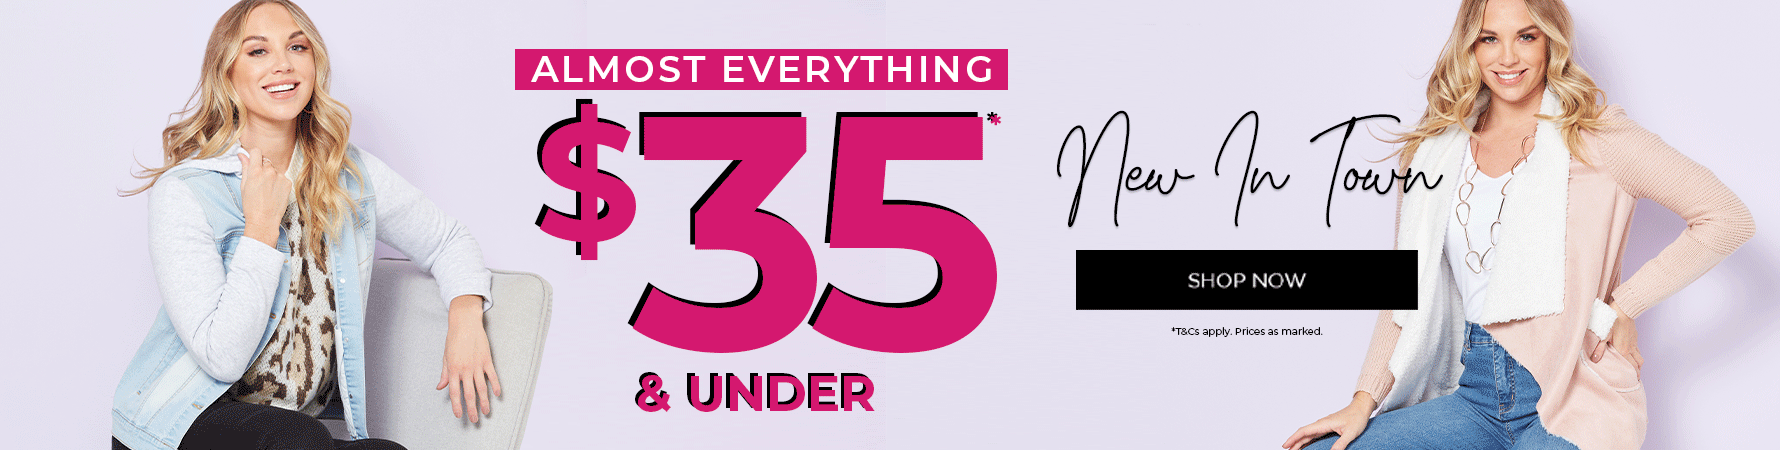 Shop almost everything $35 & under